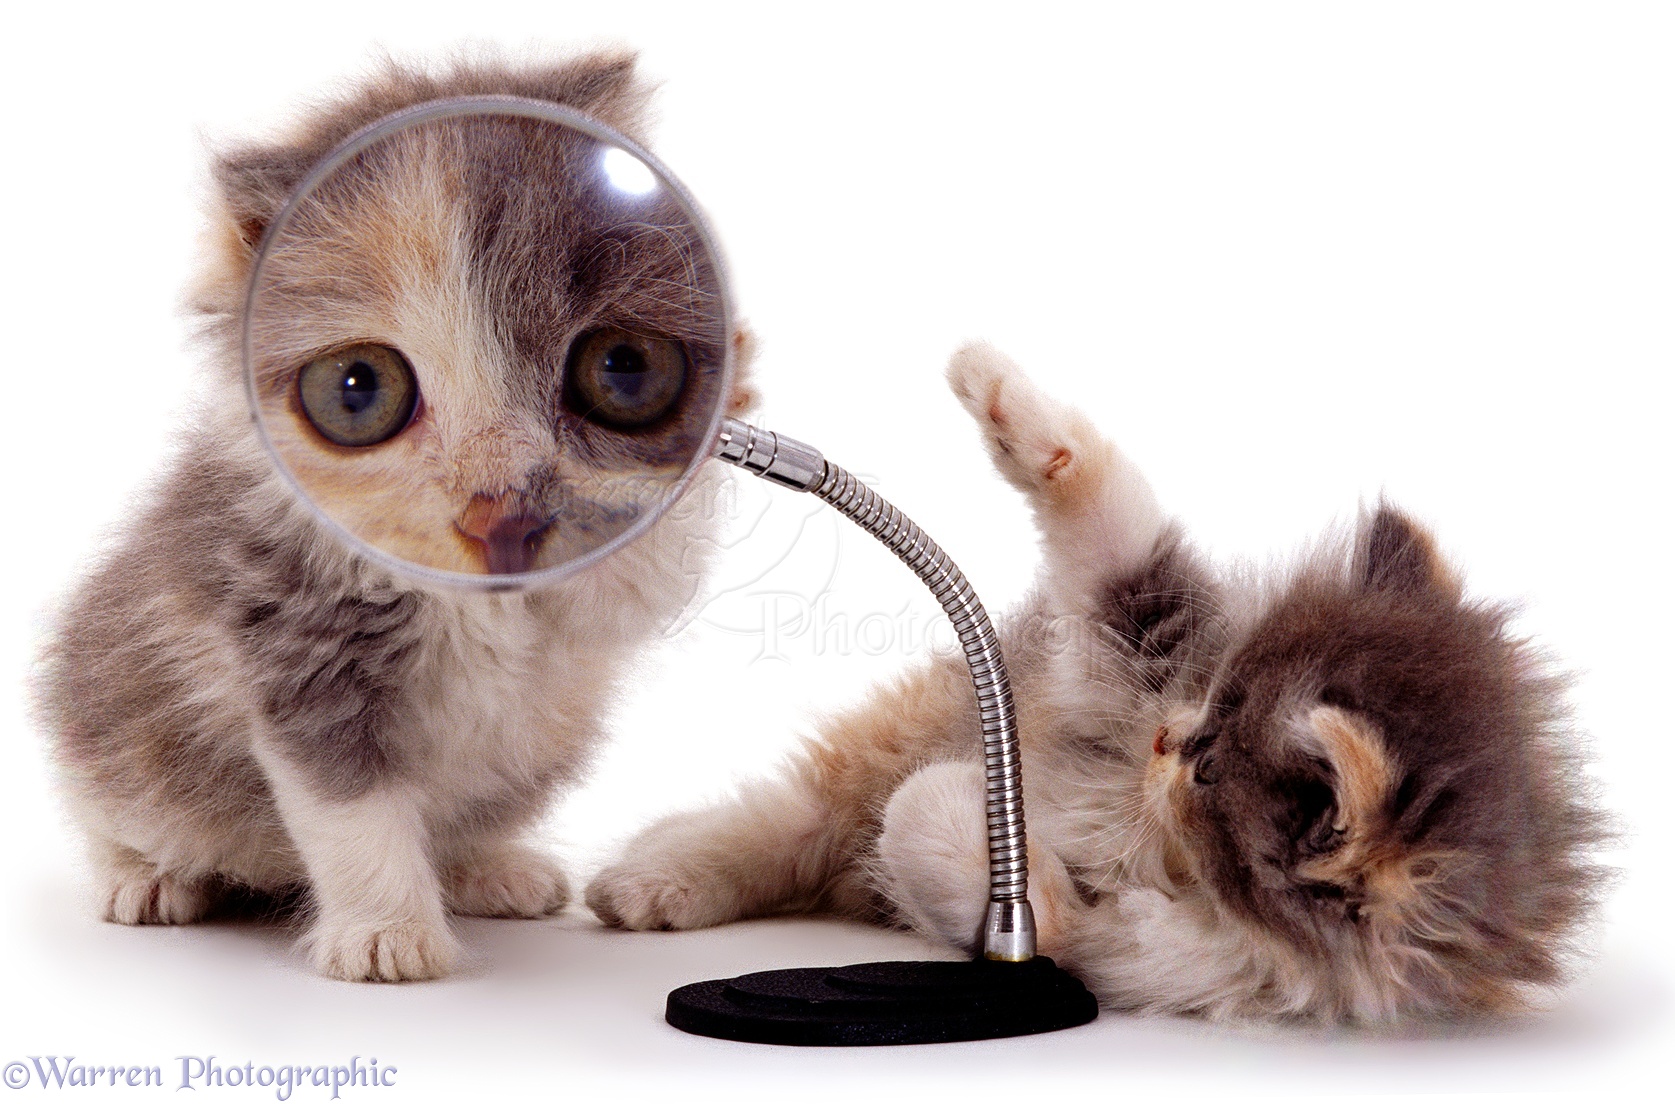 http://www.warrenphotographic.co.uk/photography/bigs/00107-kittens-and-magnifying-glass-white-background.jpg